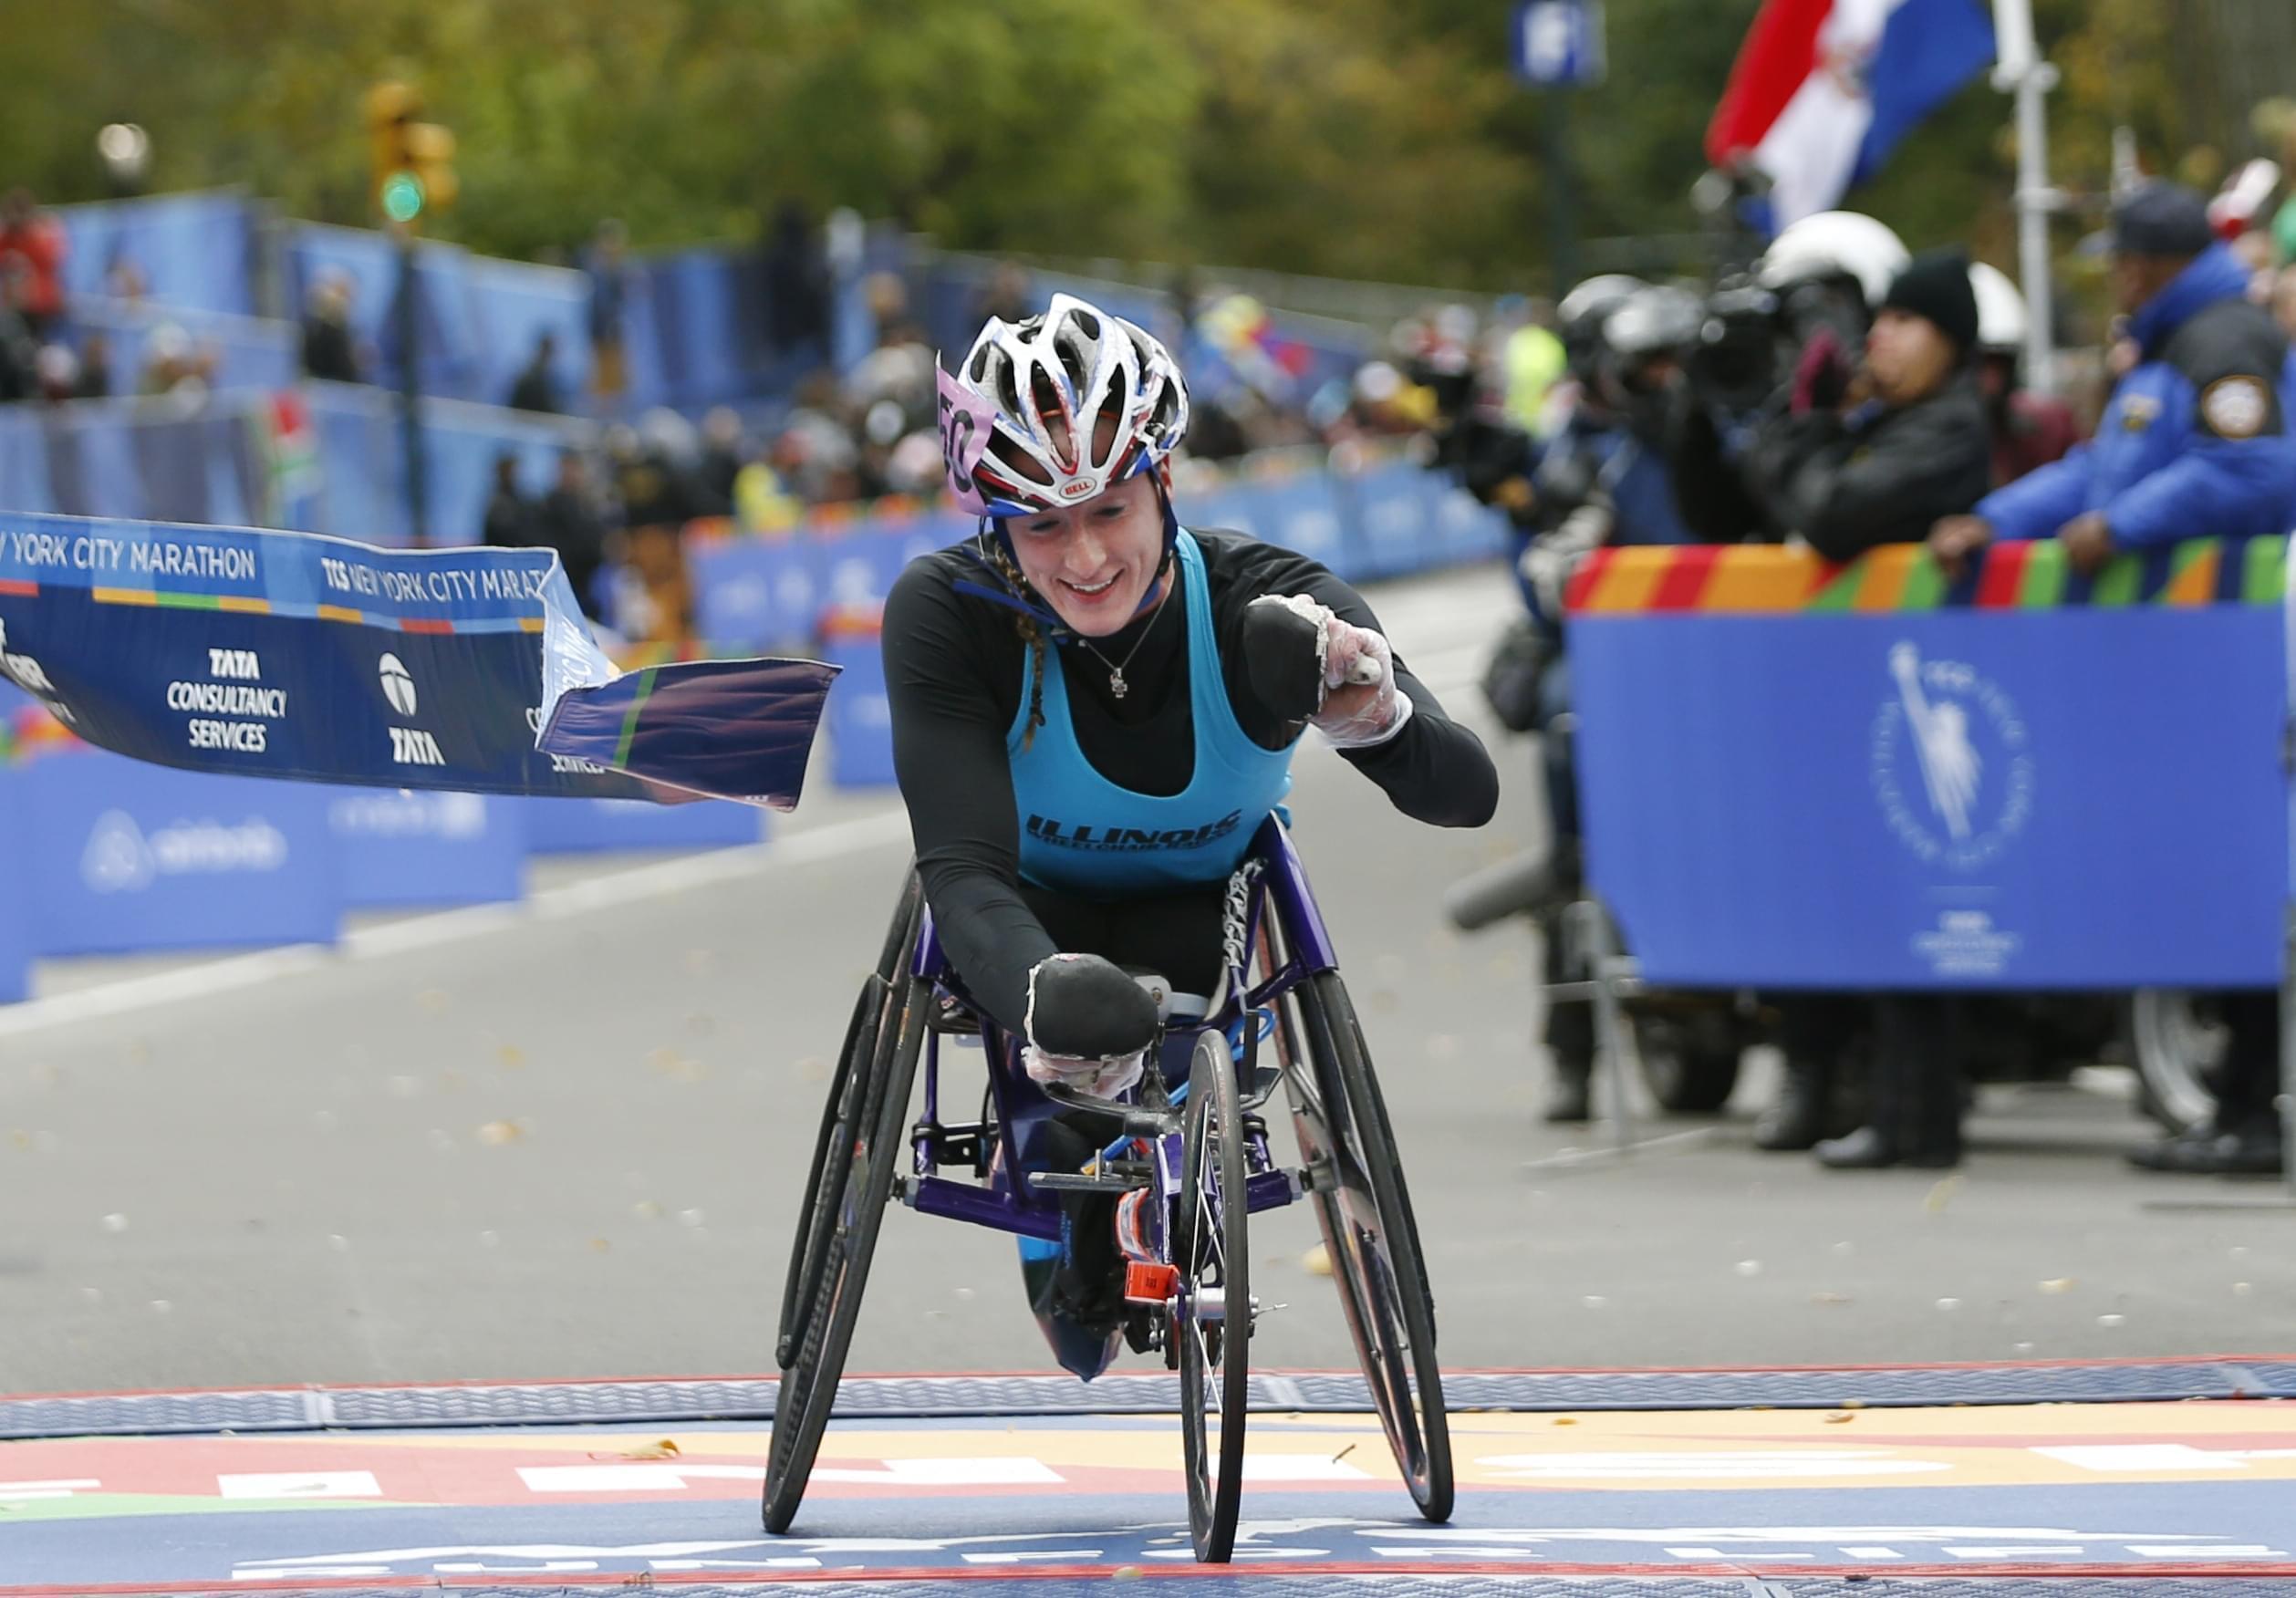 Tatyana McFadden reacts as she breaks the tape after finishing first in the women's wheelchair racing division in New York Sunday.